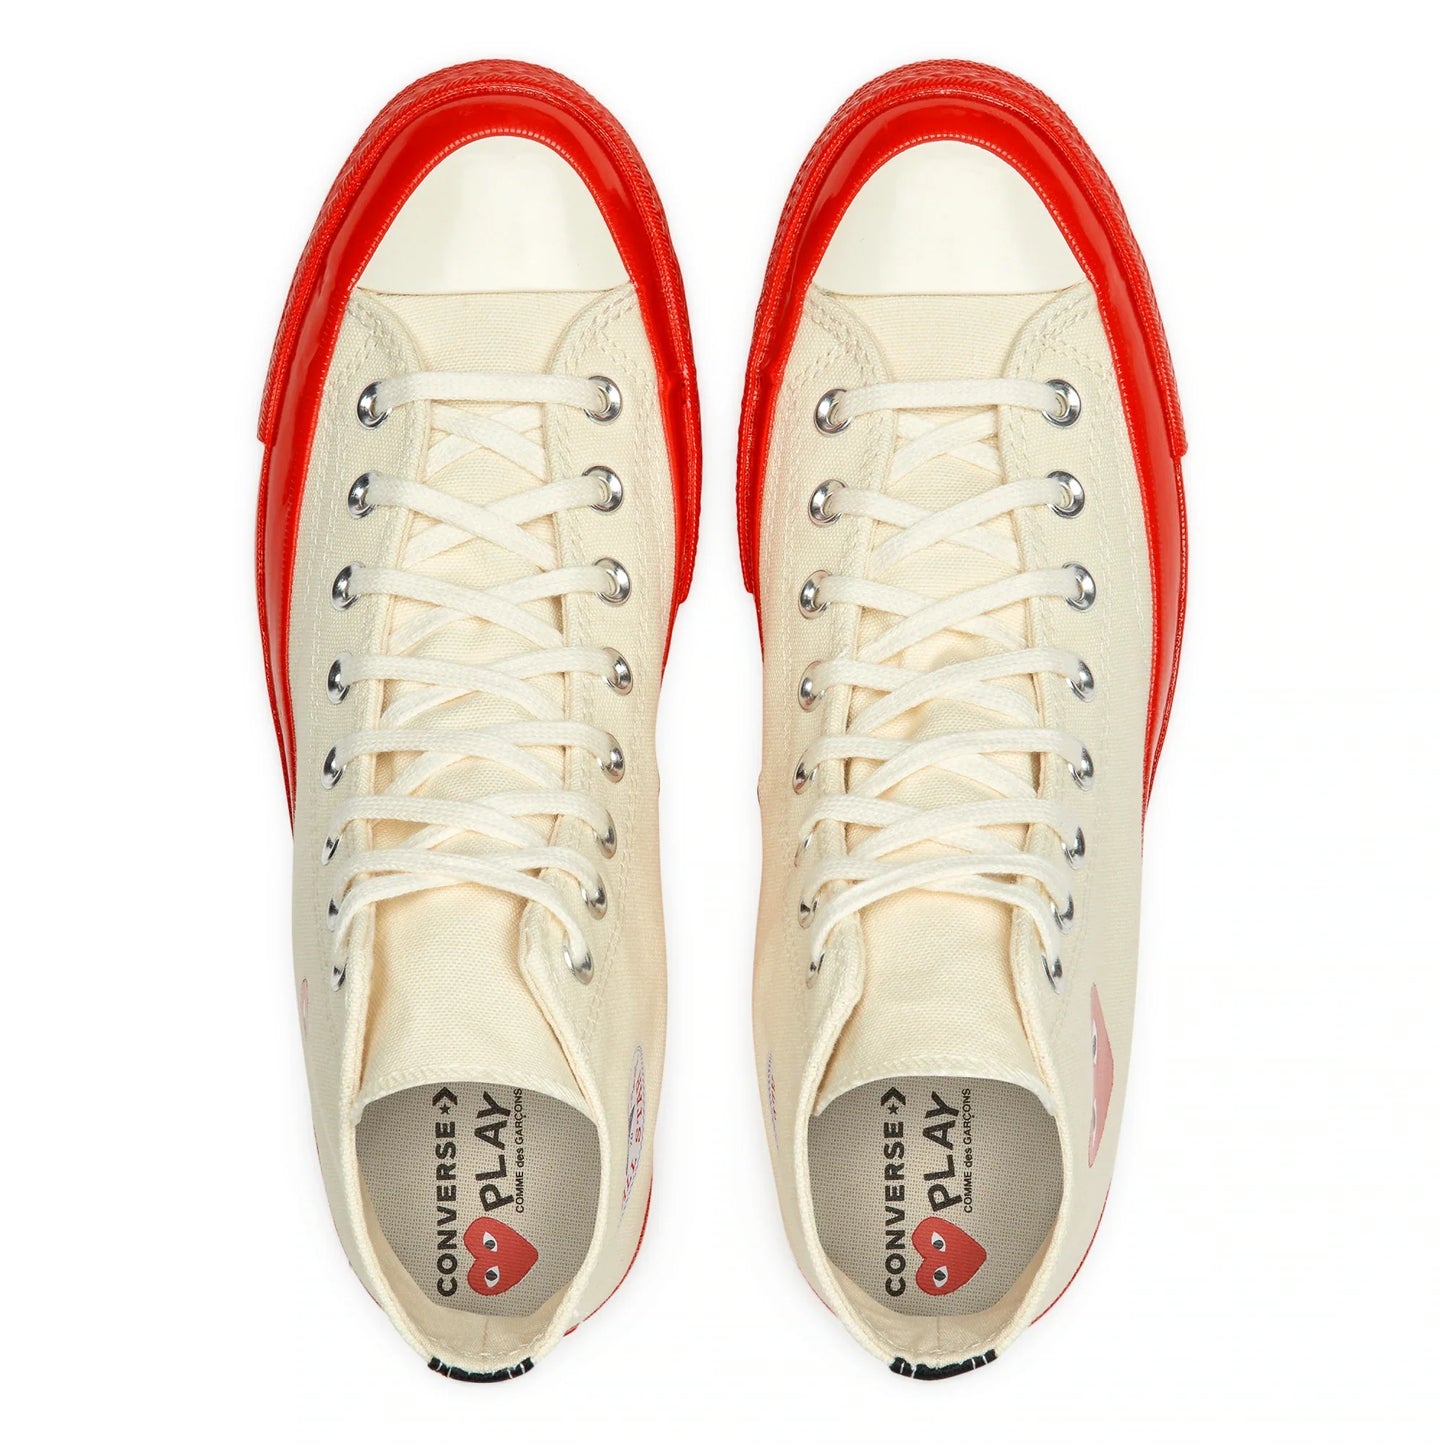 CDG PLAY X CONVERSE RED SOLE WHITE HIGH TOP SNEAKERS